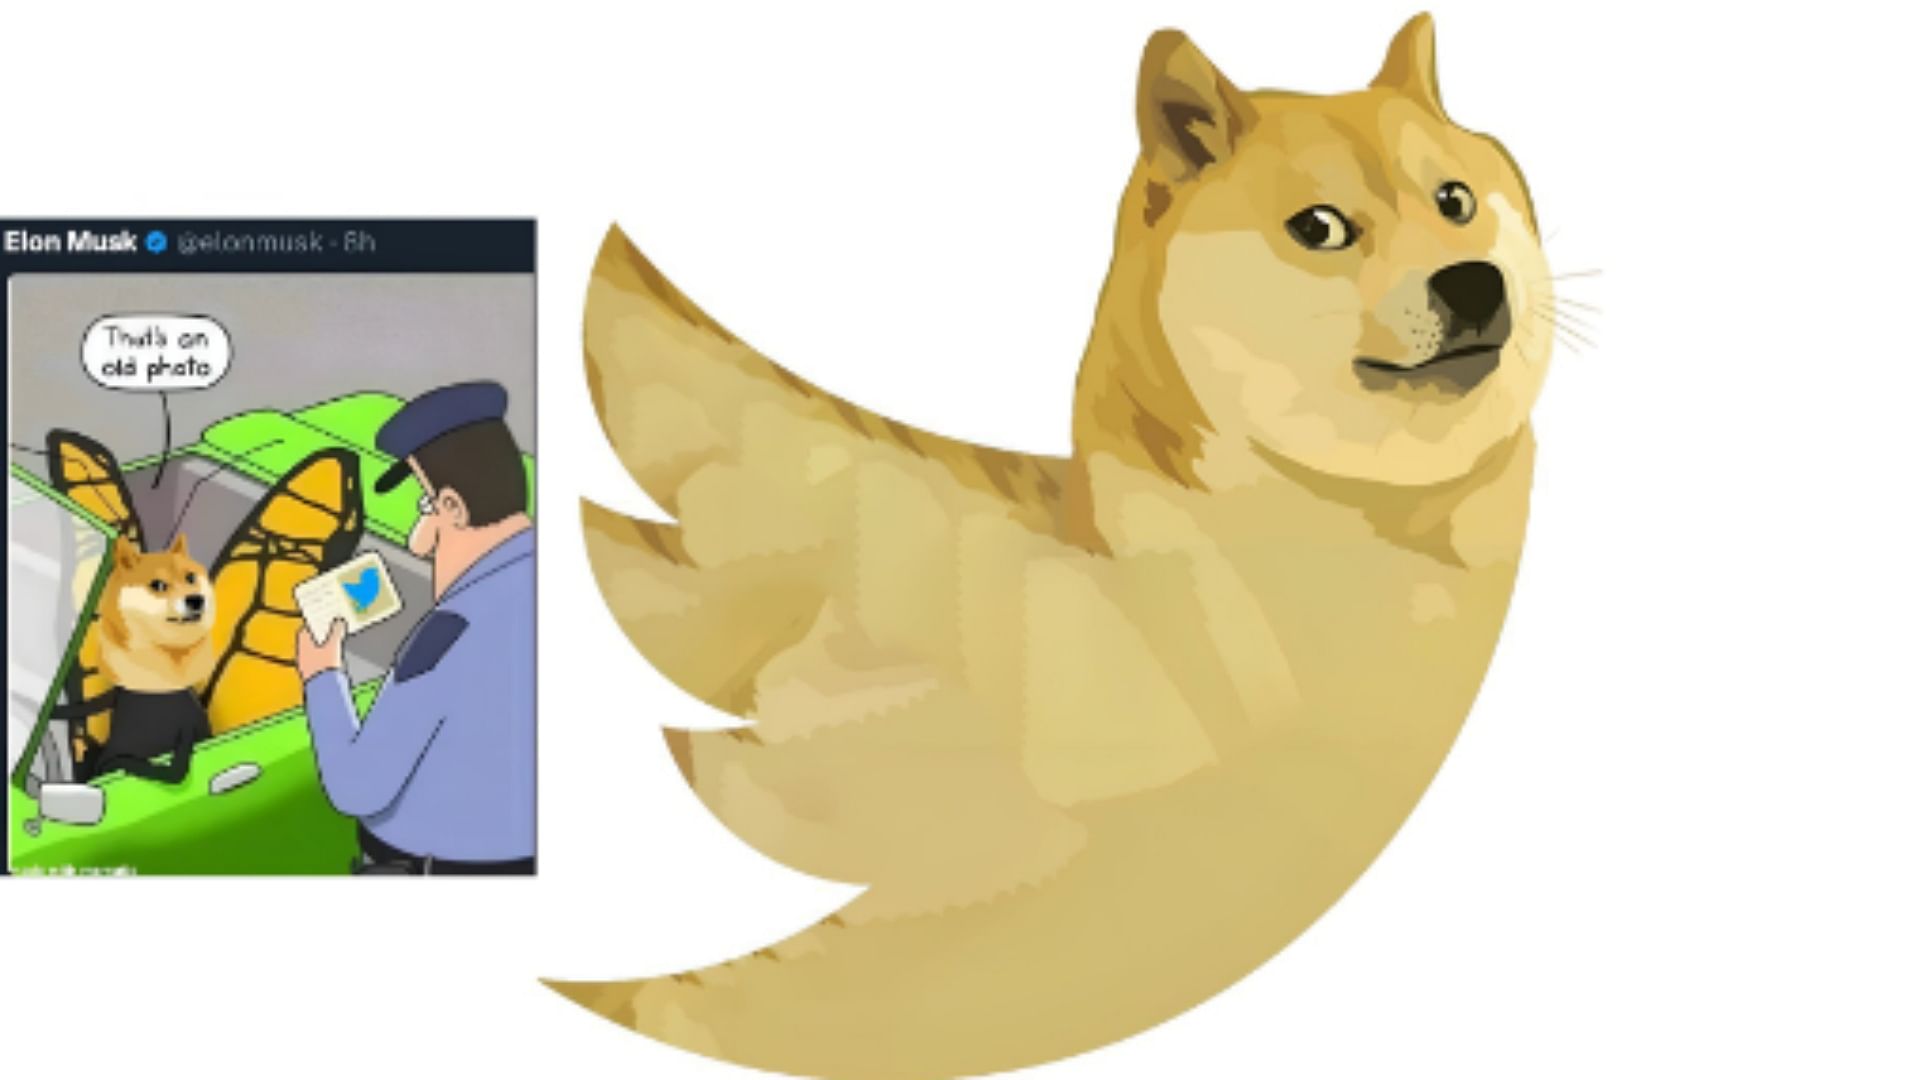 Elon Musk Replaces Twitter Blue Bird Logo With Dog Memes Getting Viral On Social Media